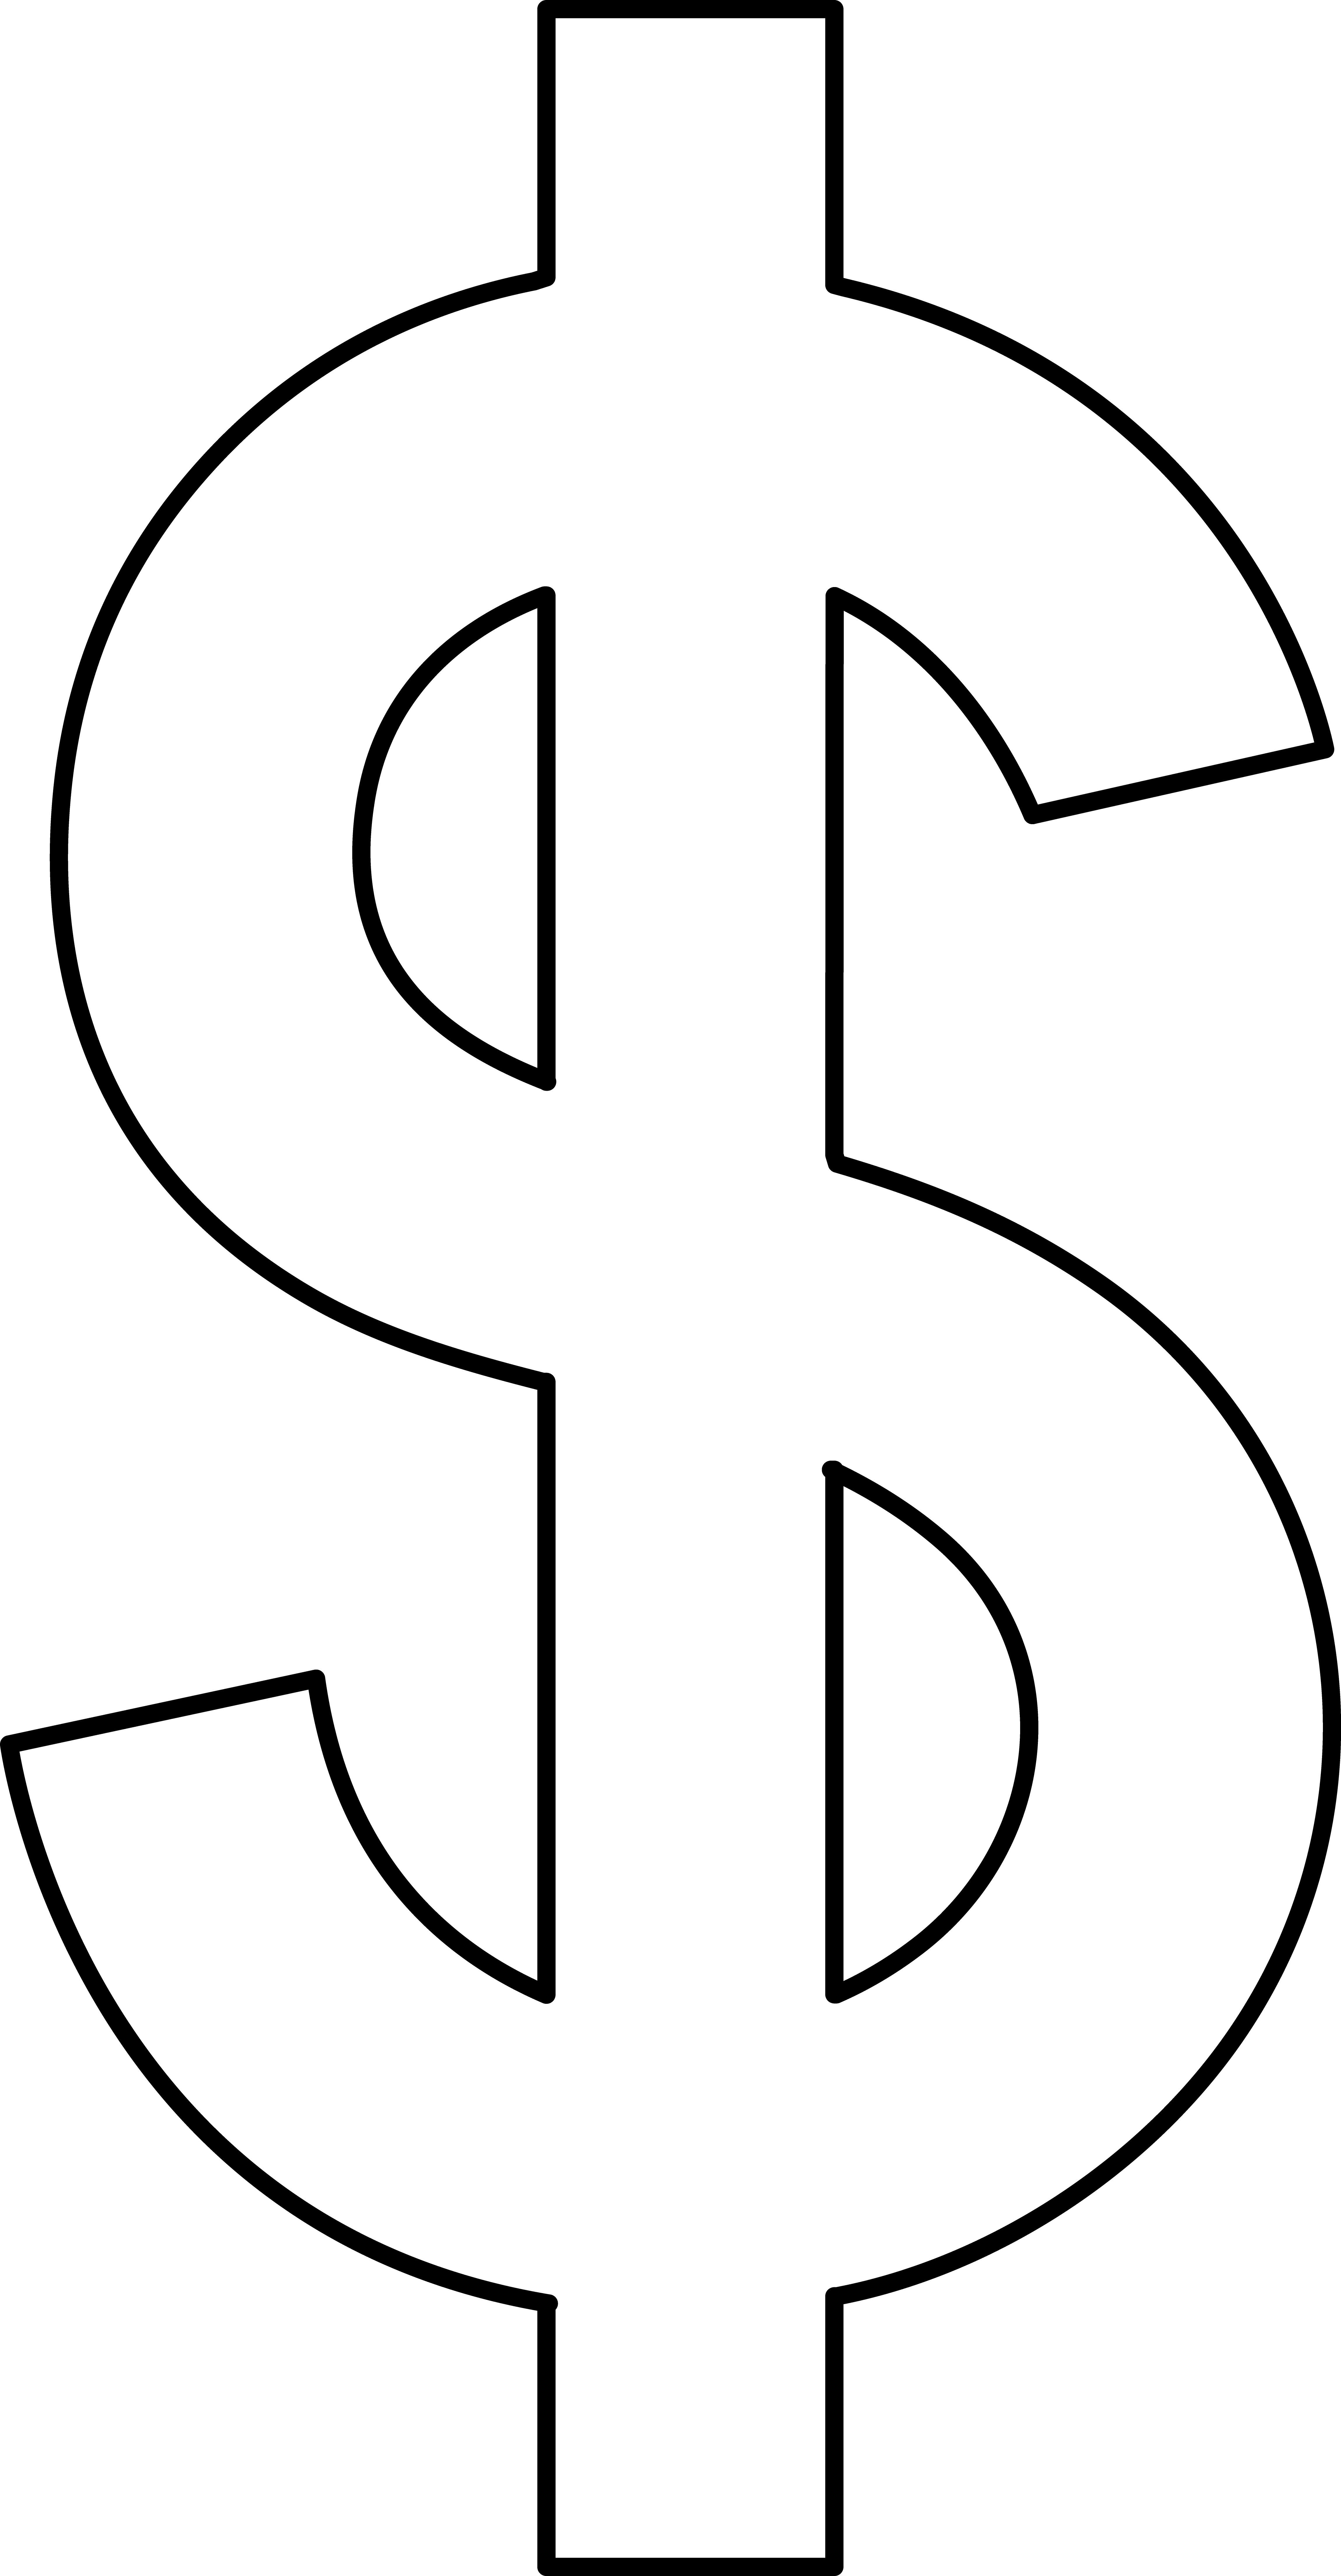 Dollar Sign Clipart Black And White | Clipart Panda - Free Clipart ...